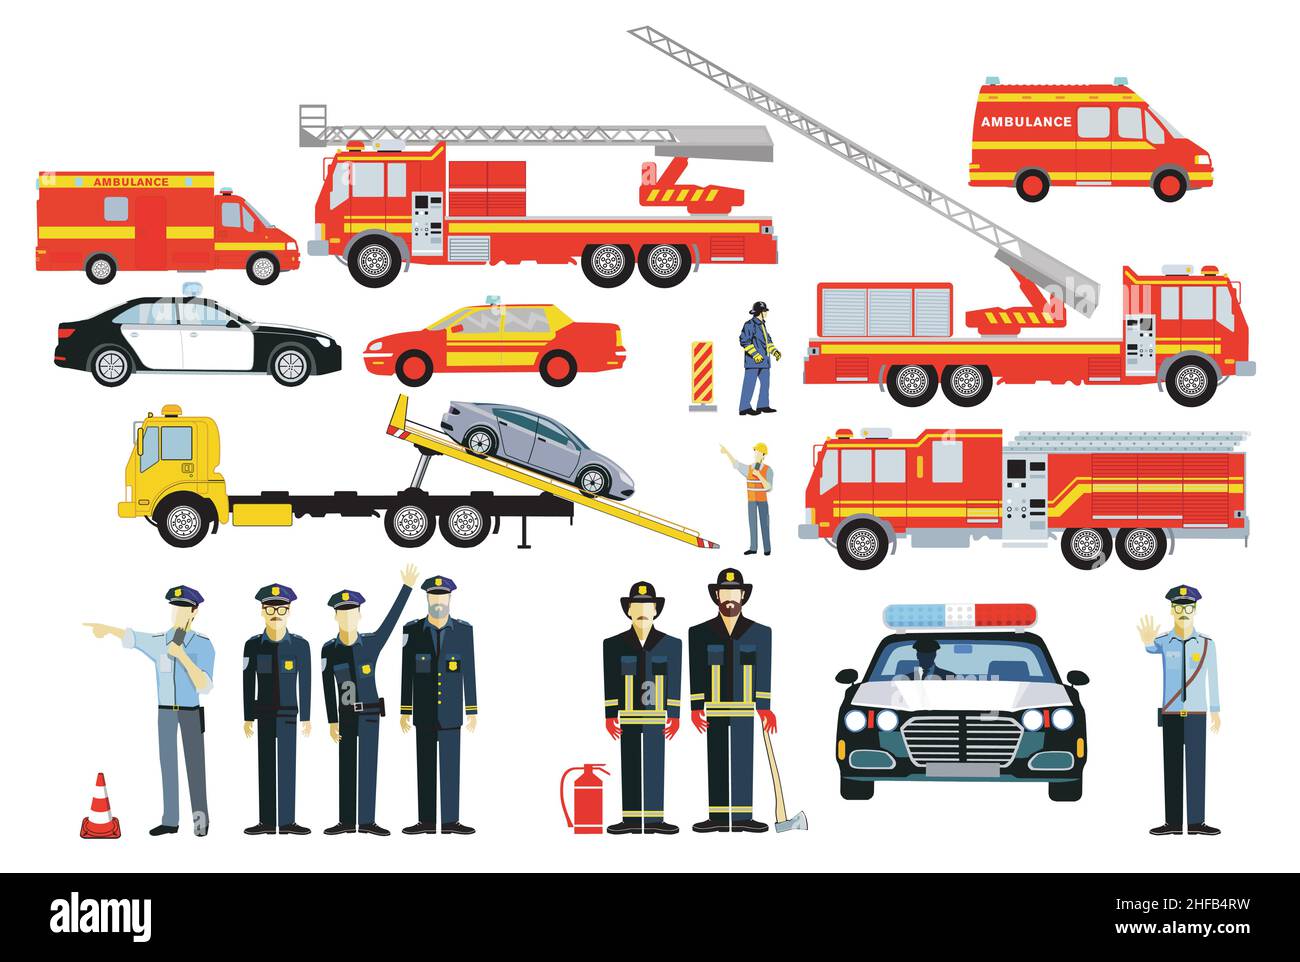 Firefighters ambulance Stock Vector Images - Alamy